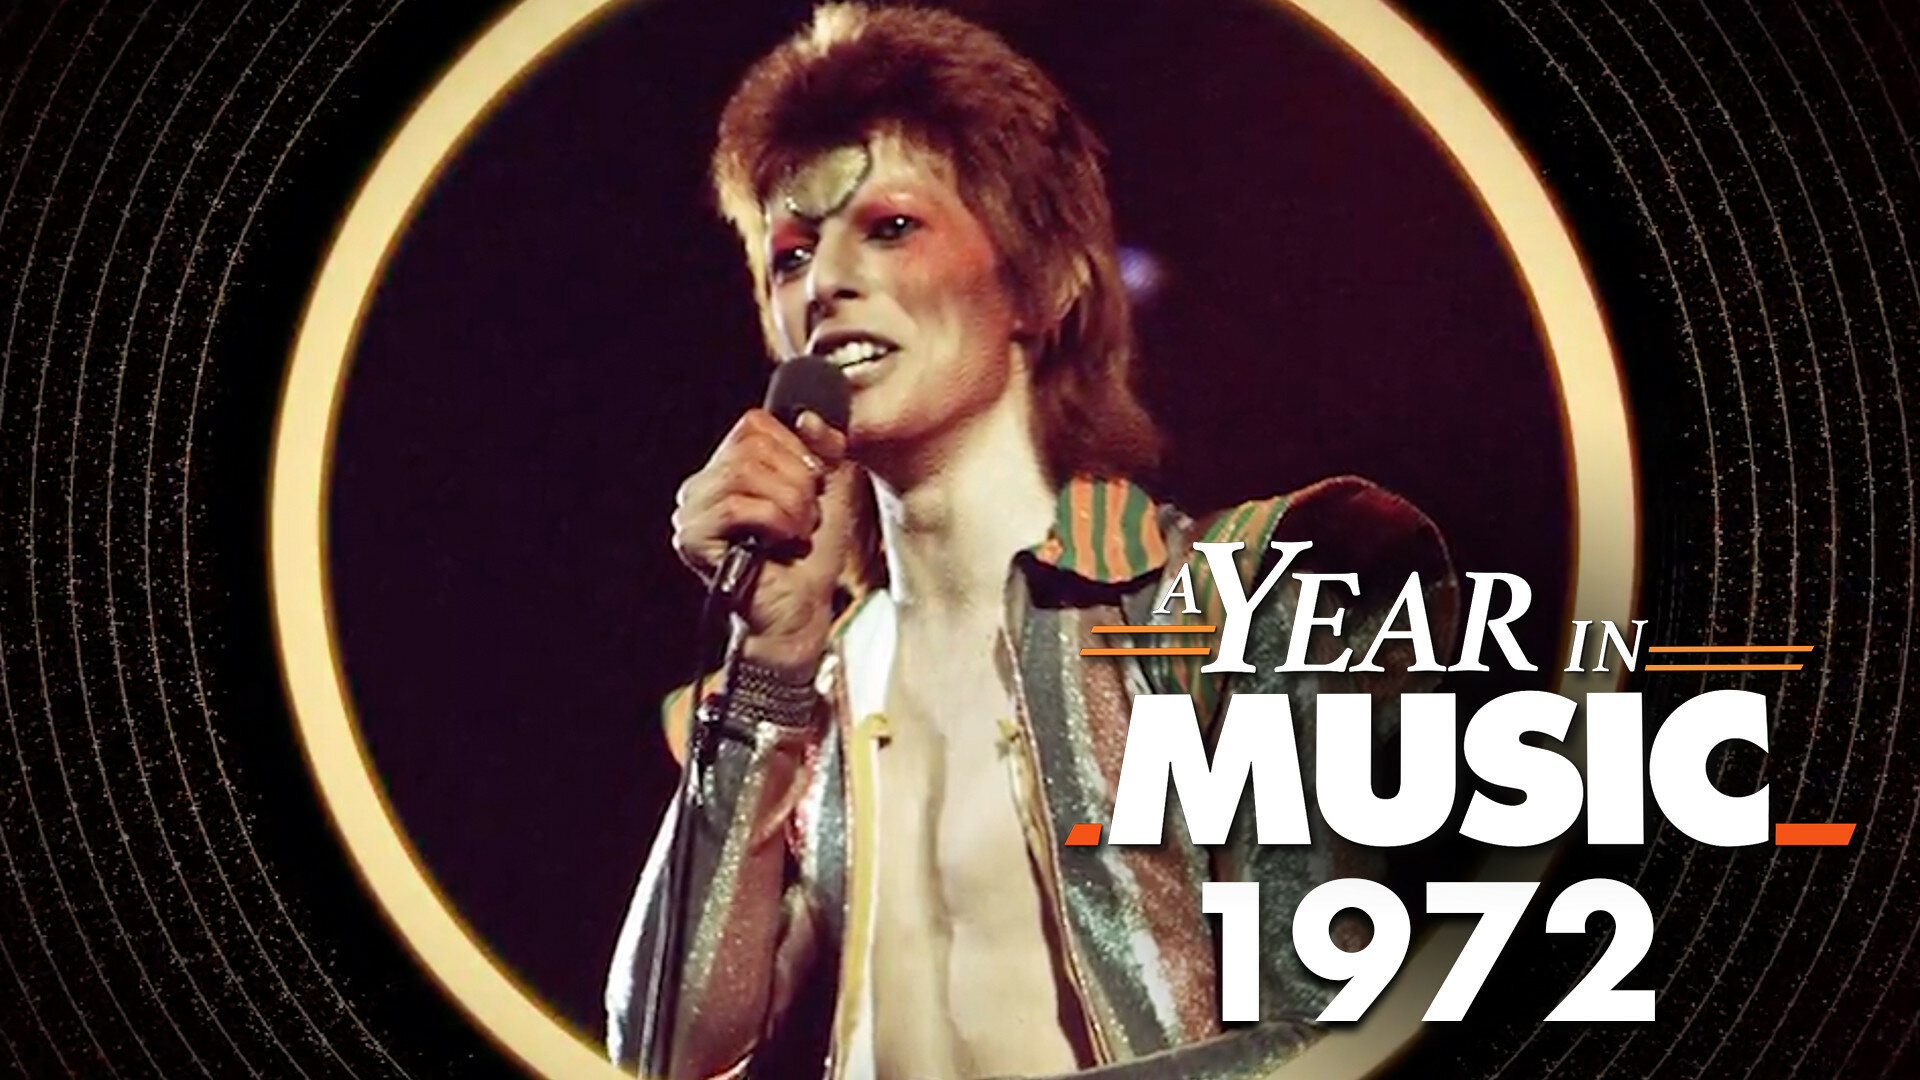 A Year in Music S1E4 1972